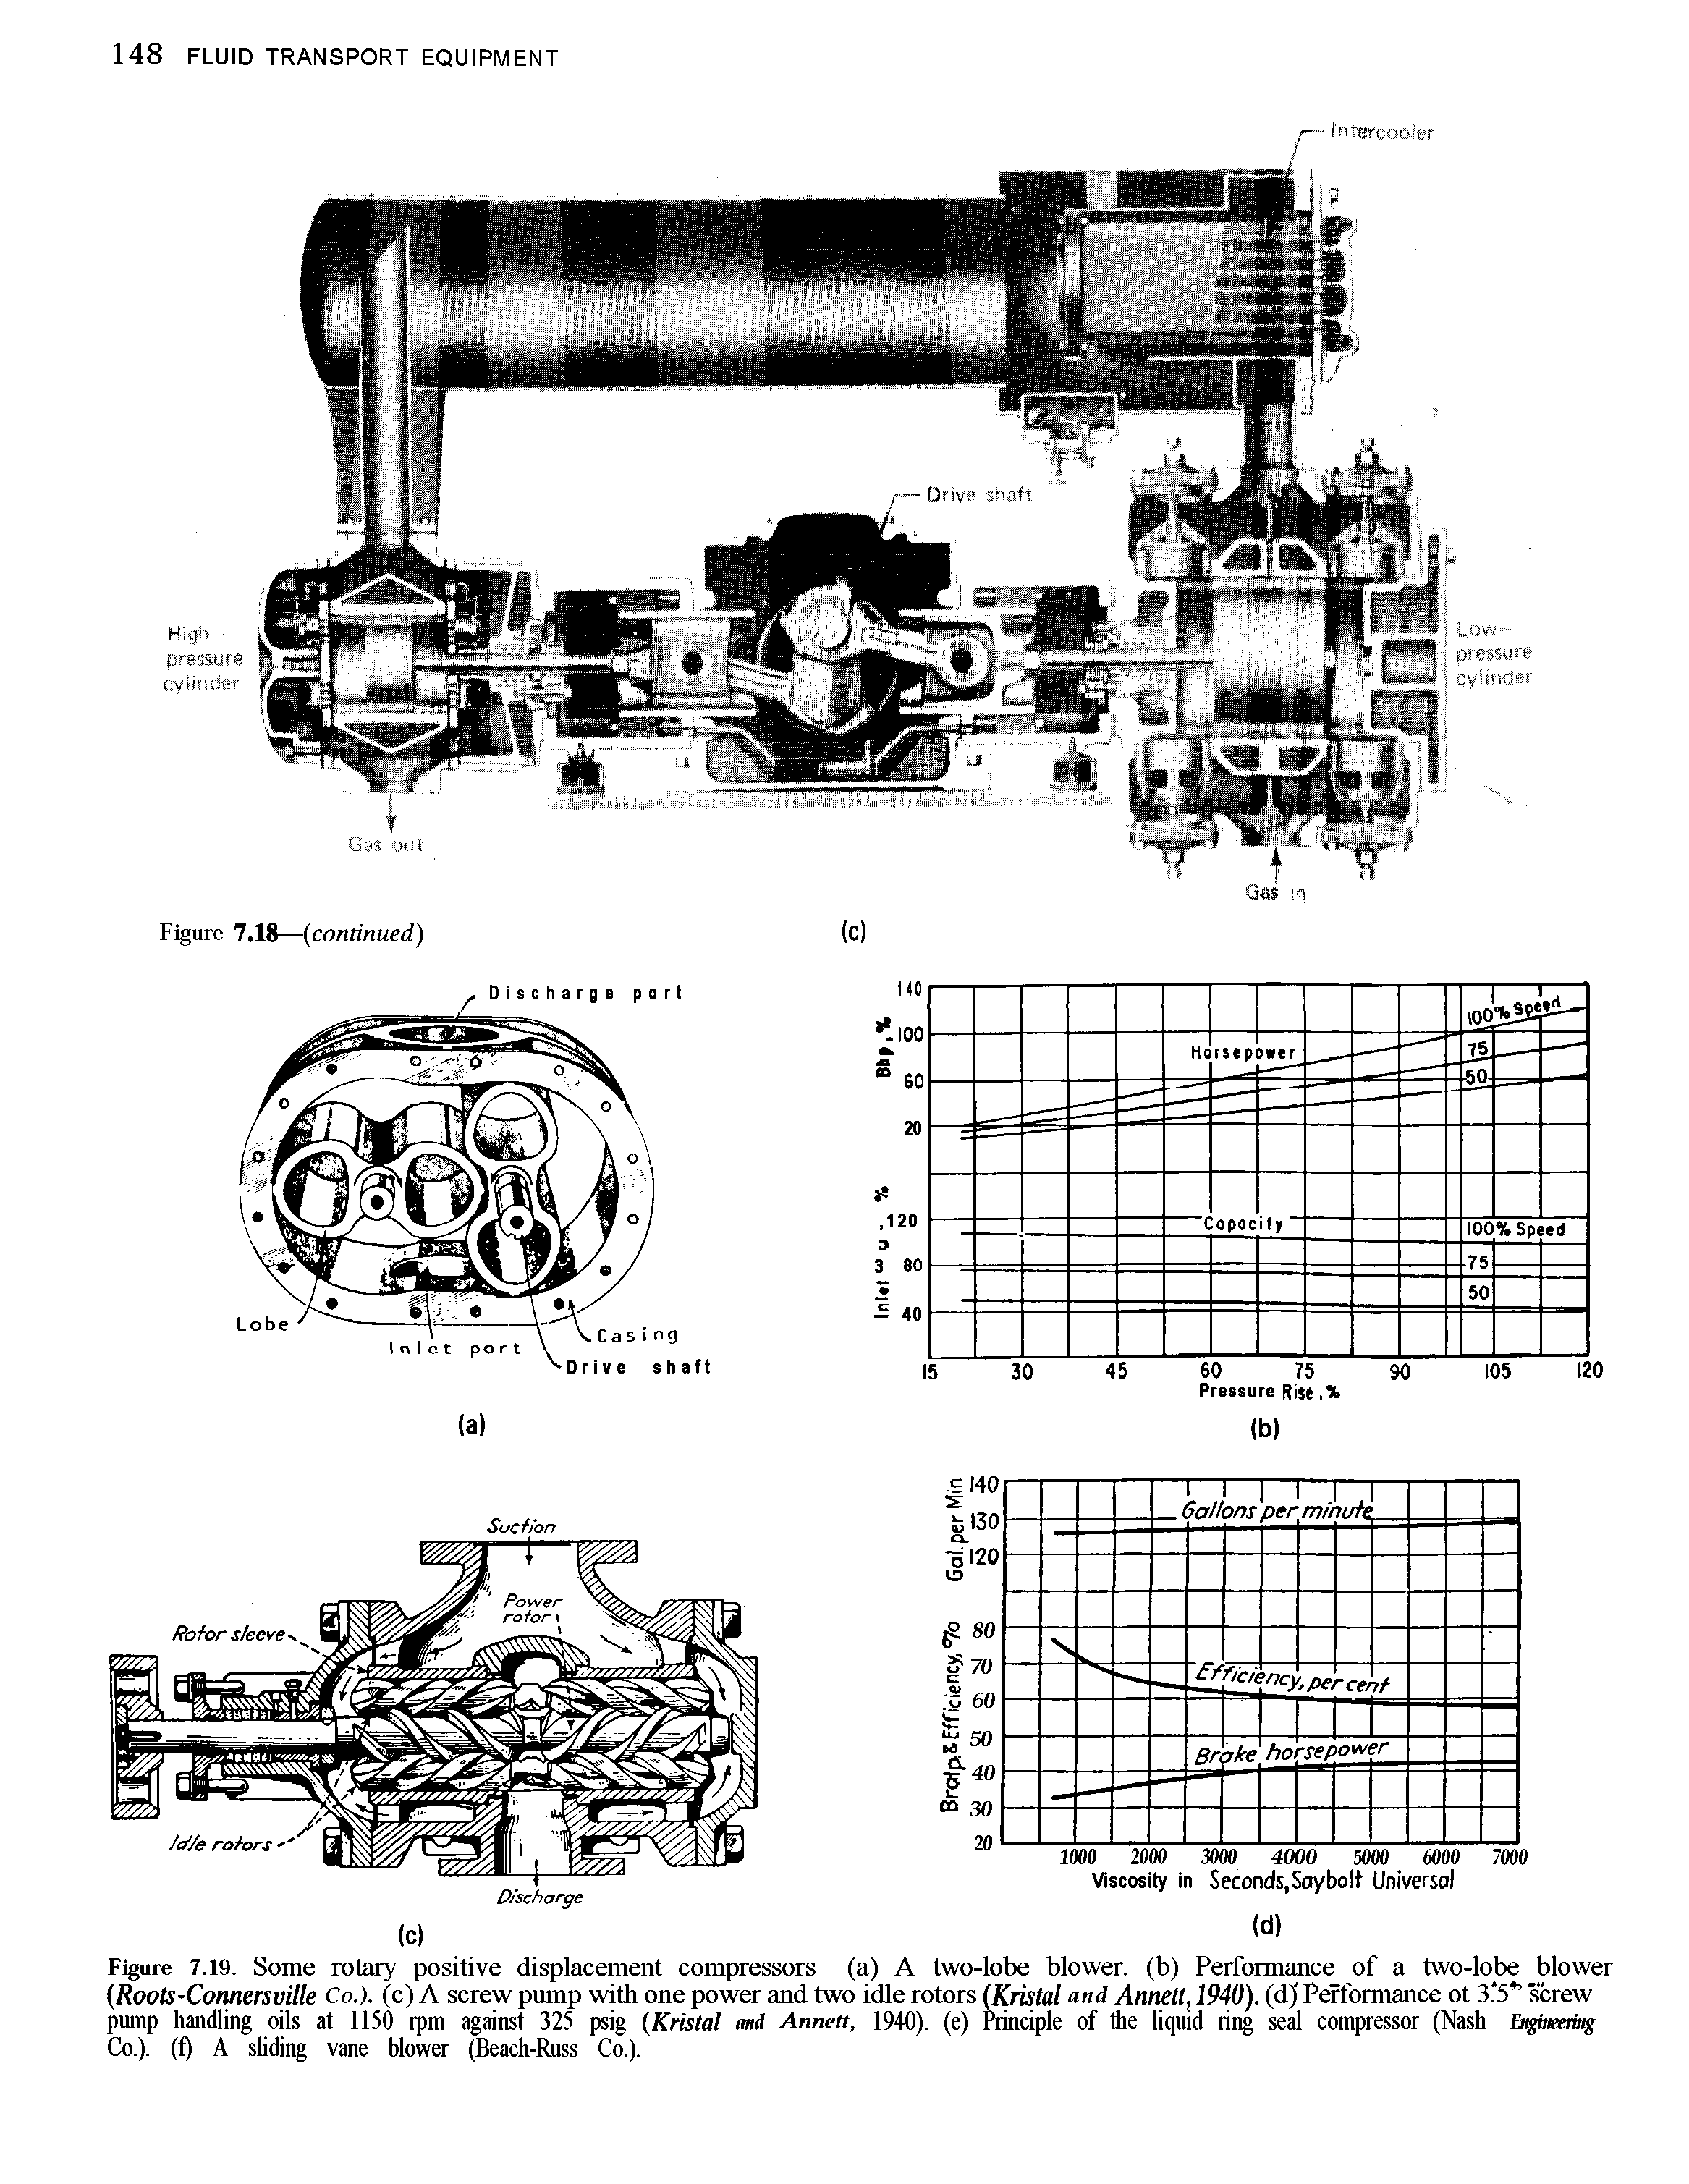 Figure 7.19. Some rotary positive displacement compressors (a) A two-lobe blower, (b) Performance of a two-lobe blower Roots-Connersville Co.), (c) A screw pump with one power and two idle rotors (Kristal and Annett, 1940). (d) Performance ot 3 5 screw pump handling oils at 1150 rpm against 325 psig Kristal mi Annett, 1940). (e) Rinciple of Ihe liquid ring seM compressor (Nash Et meemg Co.), (f) A shding vane Mower (Beach-Russ Co.).